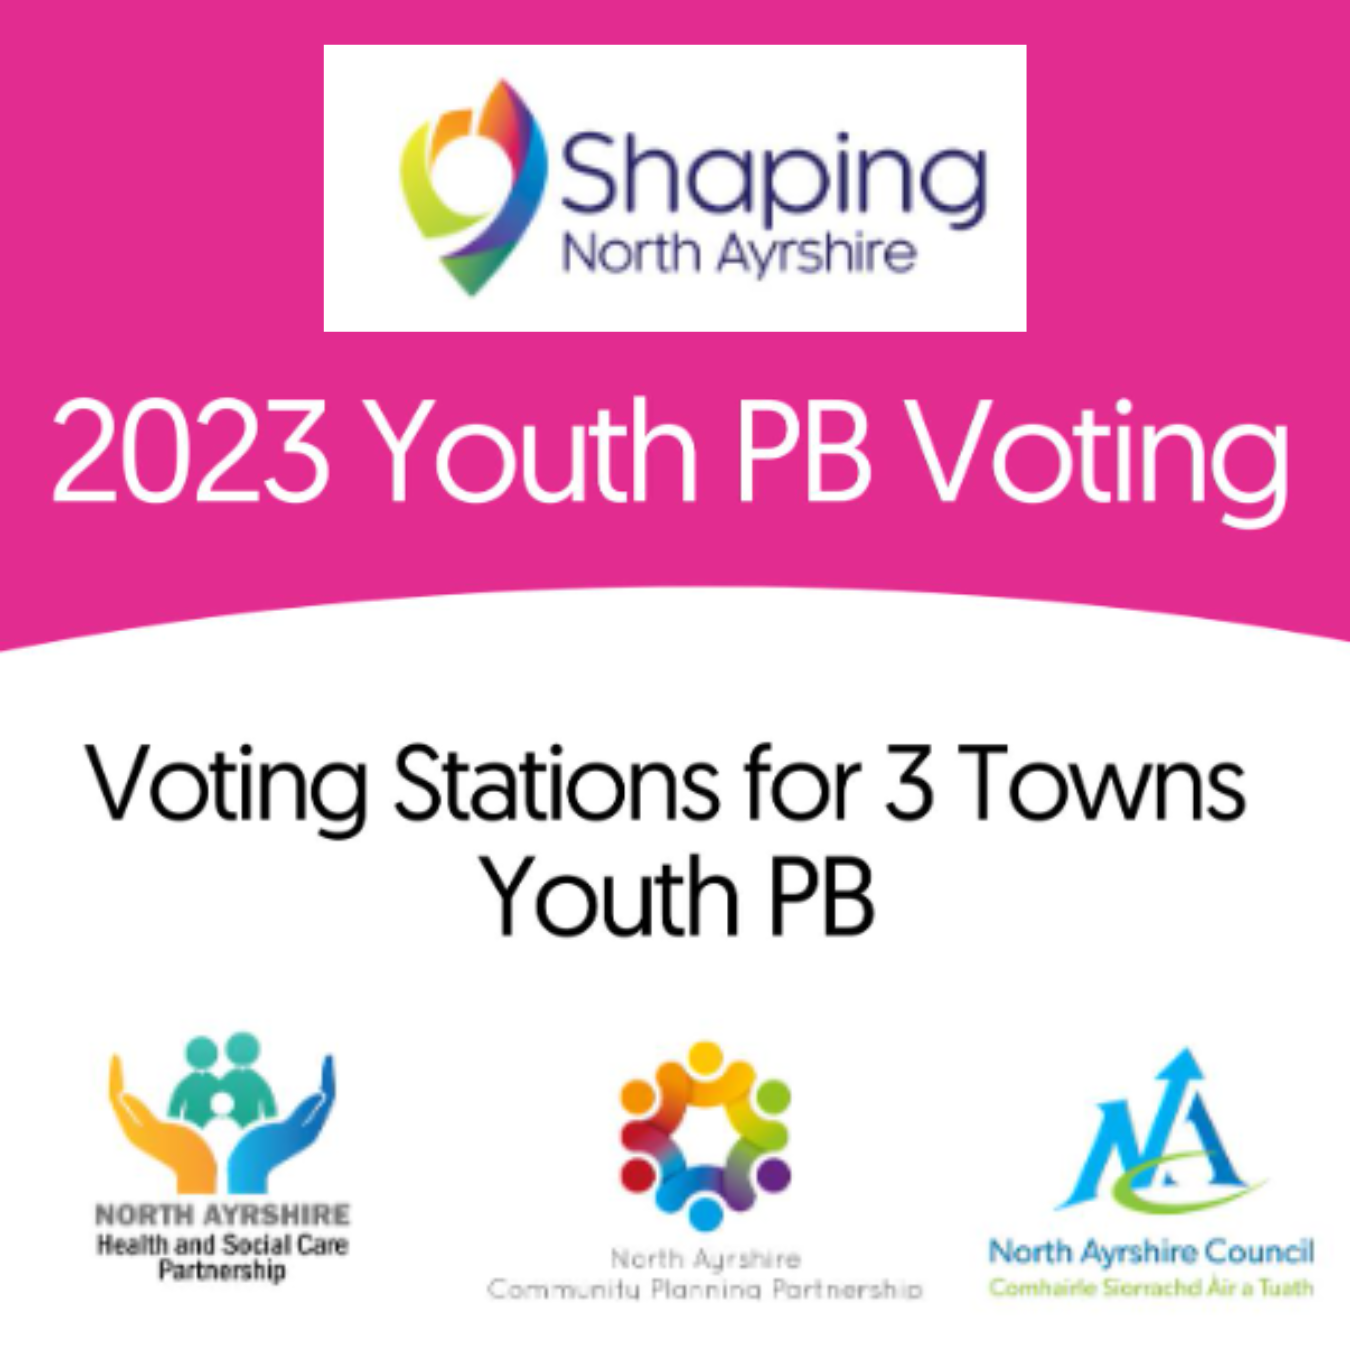 Shaping North Ayrshire logo with banner that reads: "2023 Youth PB Voting - Voting Stations for 3 Towns Youth PB - and North Ayrshire Health and Social Care Partnership logo, North Ayrshire Community Planning Partnership logo and North Ayrshire Council logo